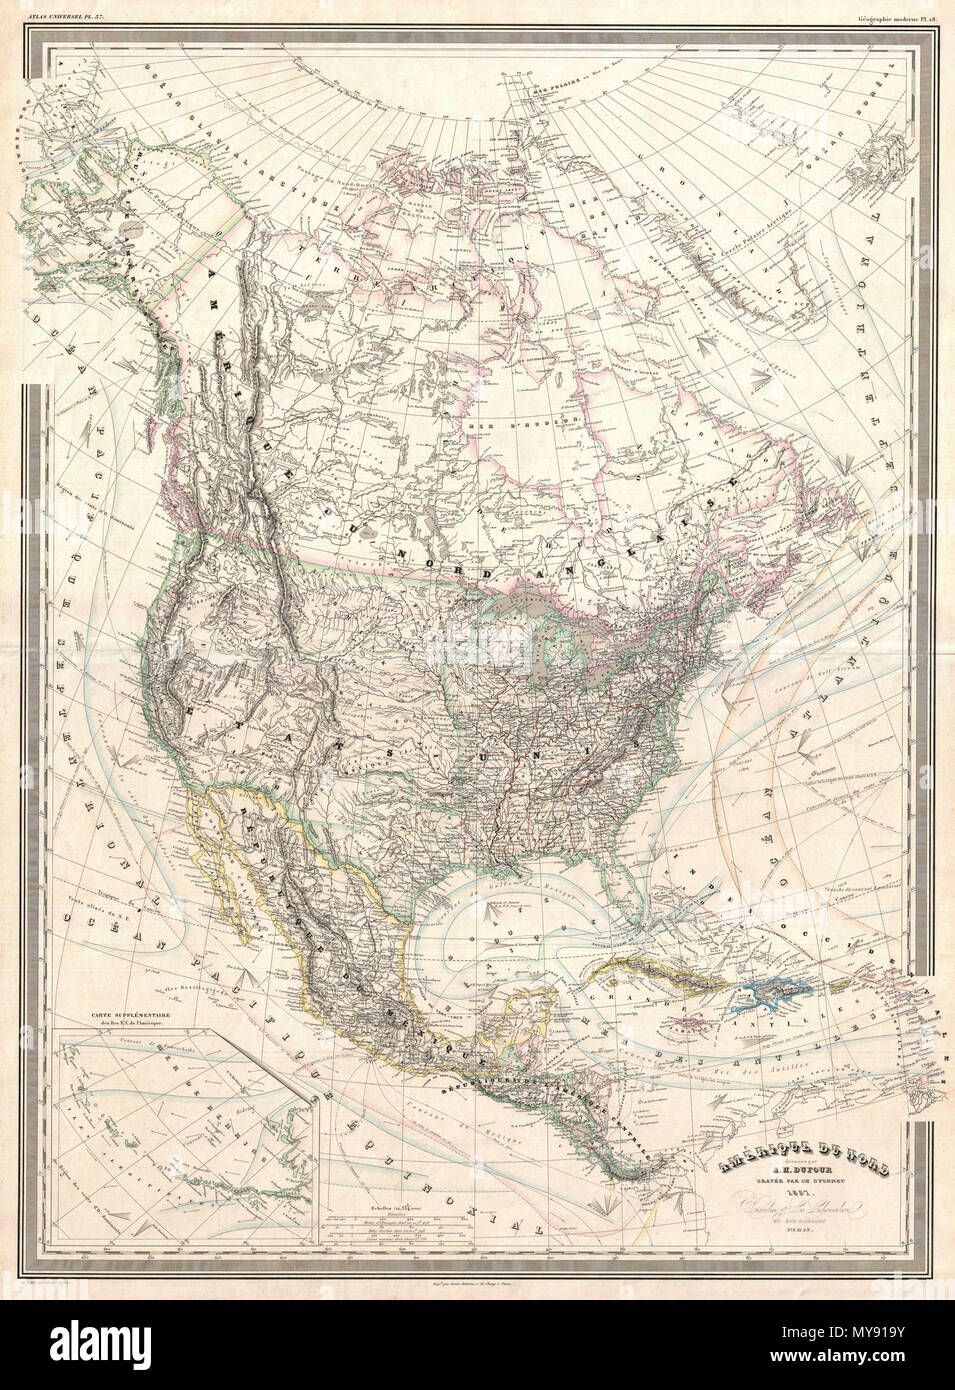 . Amerique du Nord.  English: A finely detailed large format 1857 map of the North America on Mercator's projection by the French cartographer A. H. Dufour. This map covers the entire continent from the Polar Ice Cap to the northern part of South America inclusive of the West Indies, Central America, Mexico, the United States, Canada and Alaska. In addition to standard political and physical data this map offers a vast wealth of cartographic information including nautical routes, currents, winds, notes on explorers, some offshore details, comments on the polar ice caps, notes on vegetation, an Stock Photo